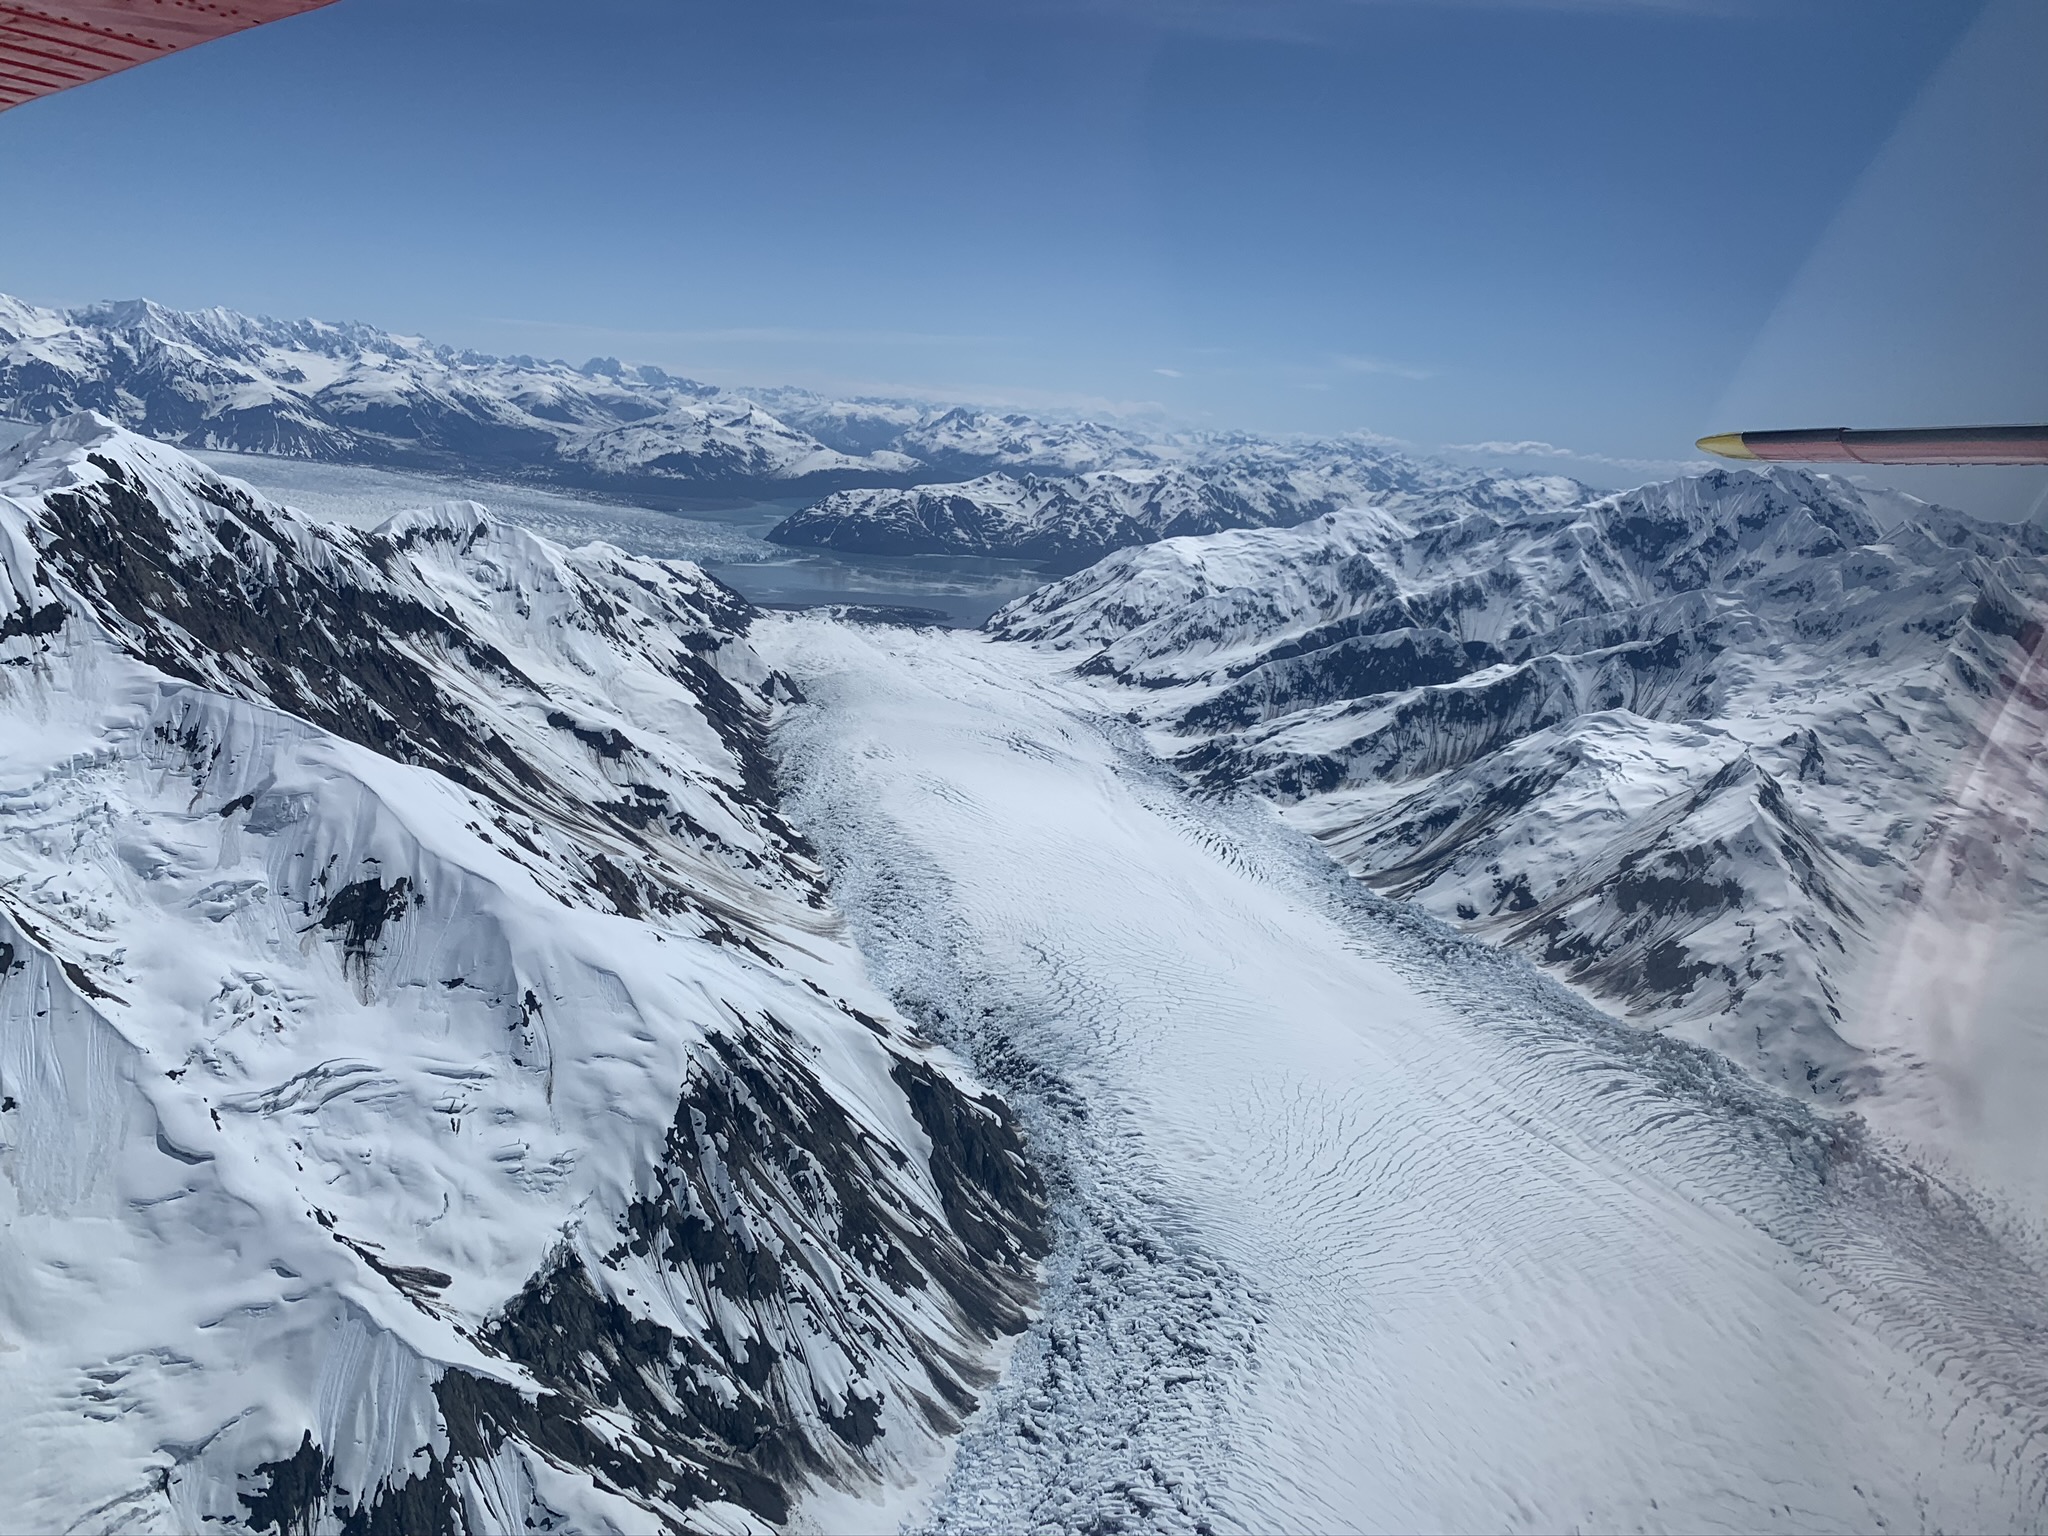 Turner Glacier from Helicopter